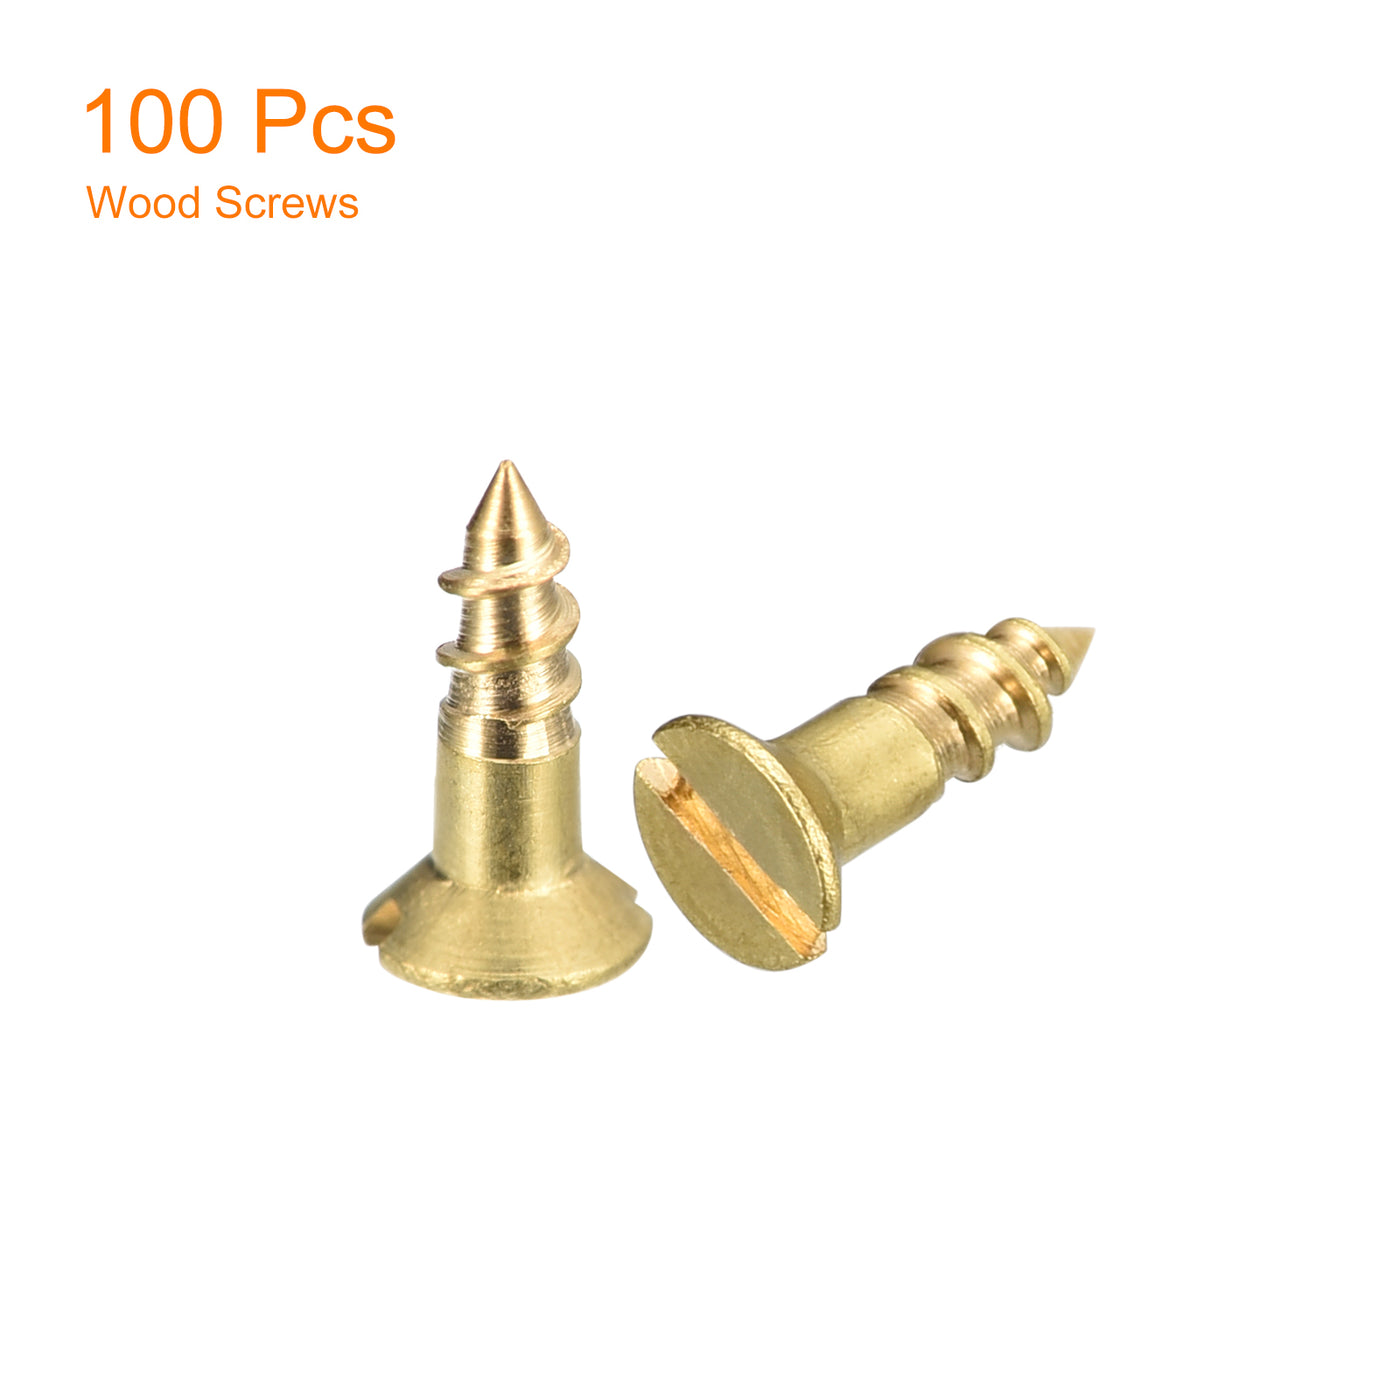 uxcell Uxcell 100Pcs M2.5 x 8mm Brass Slotted Drive Flat Head Wood Screws Self Tapping Screw